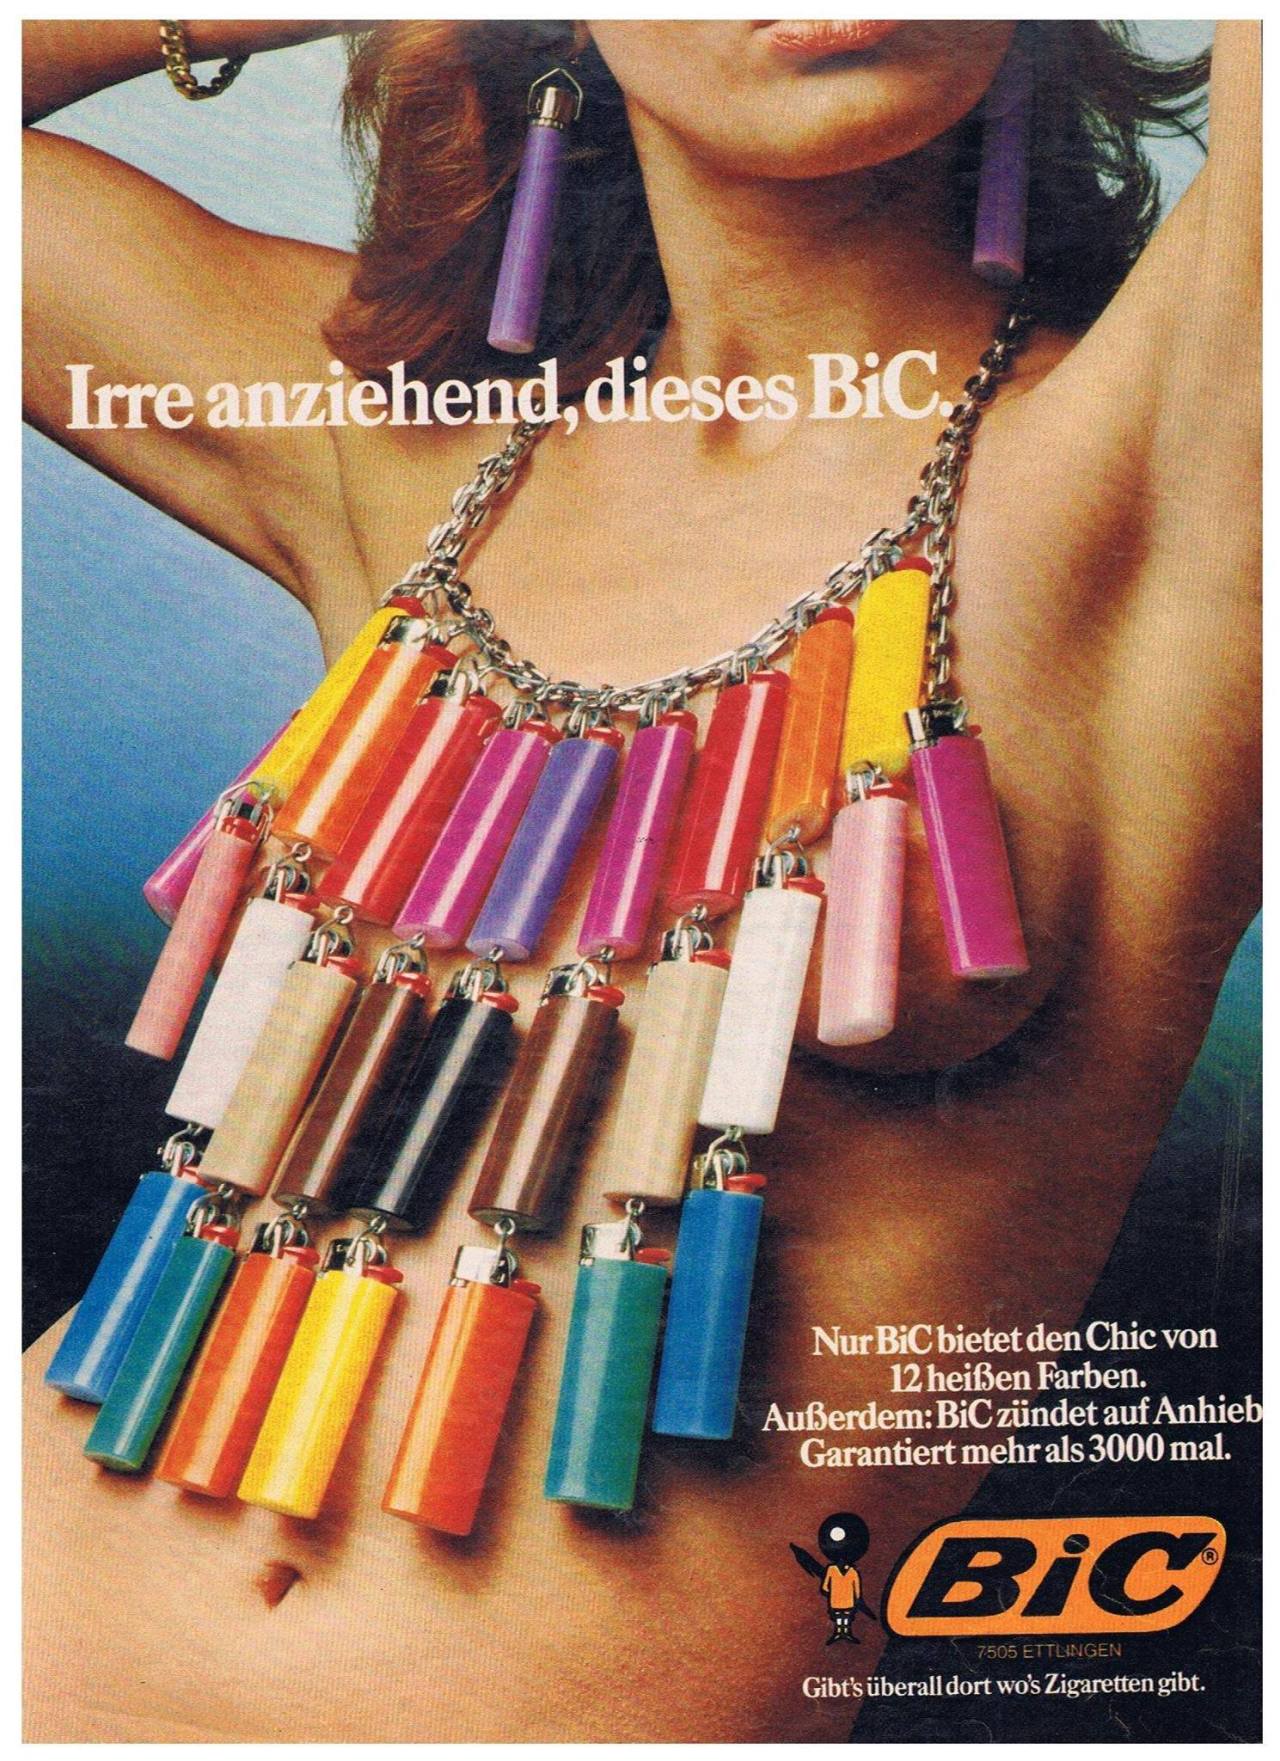 german bic lighter advertisement translates into “madly attractive, this bic. only bic offers the chic of 12 hot colors. moreover: bic ignites straight away. guaranteed more than 3000 times.” #germany#german#90s aesthetic#aesthetic lighter#lighter#bic